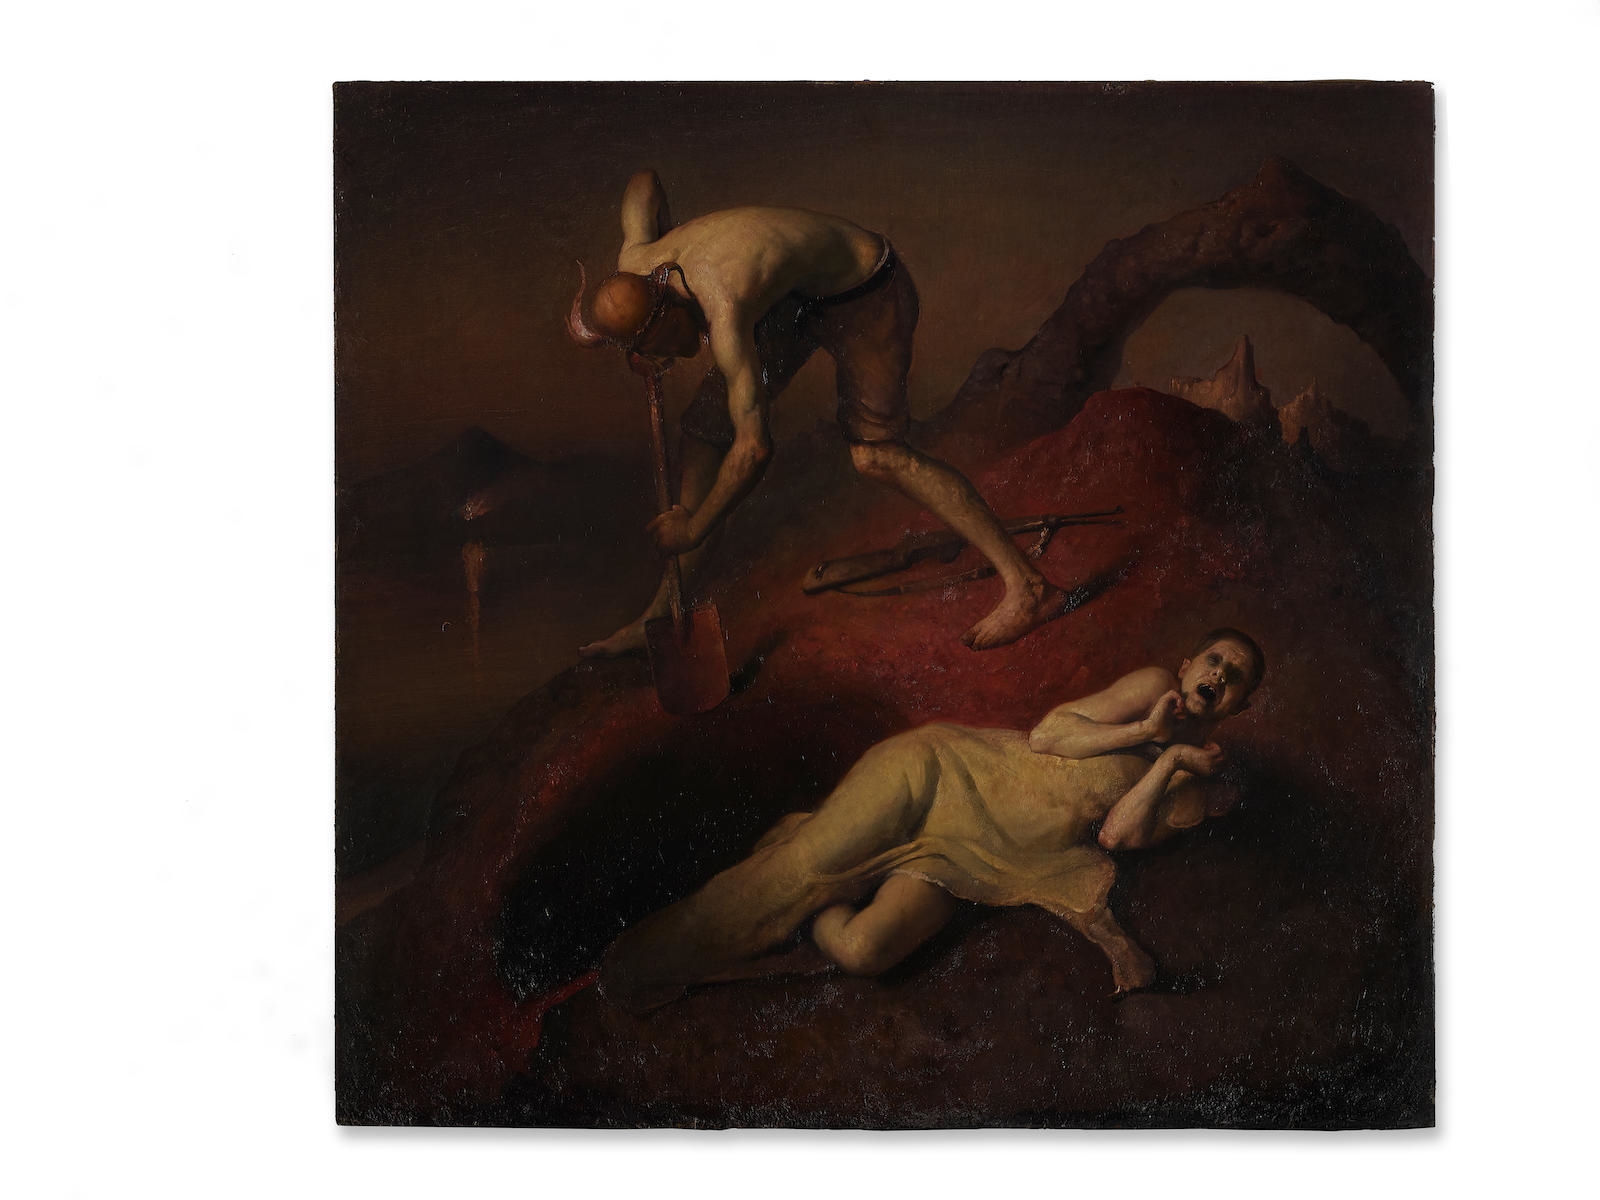 Buried Alive , 1995-1996 by Odd Nerdrum, executed in 1995-1996